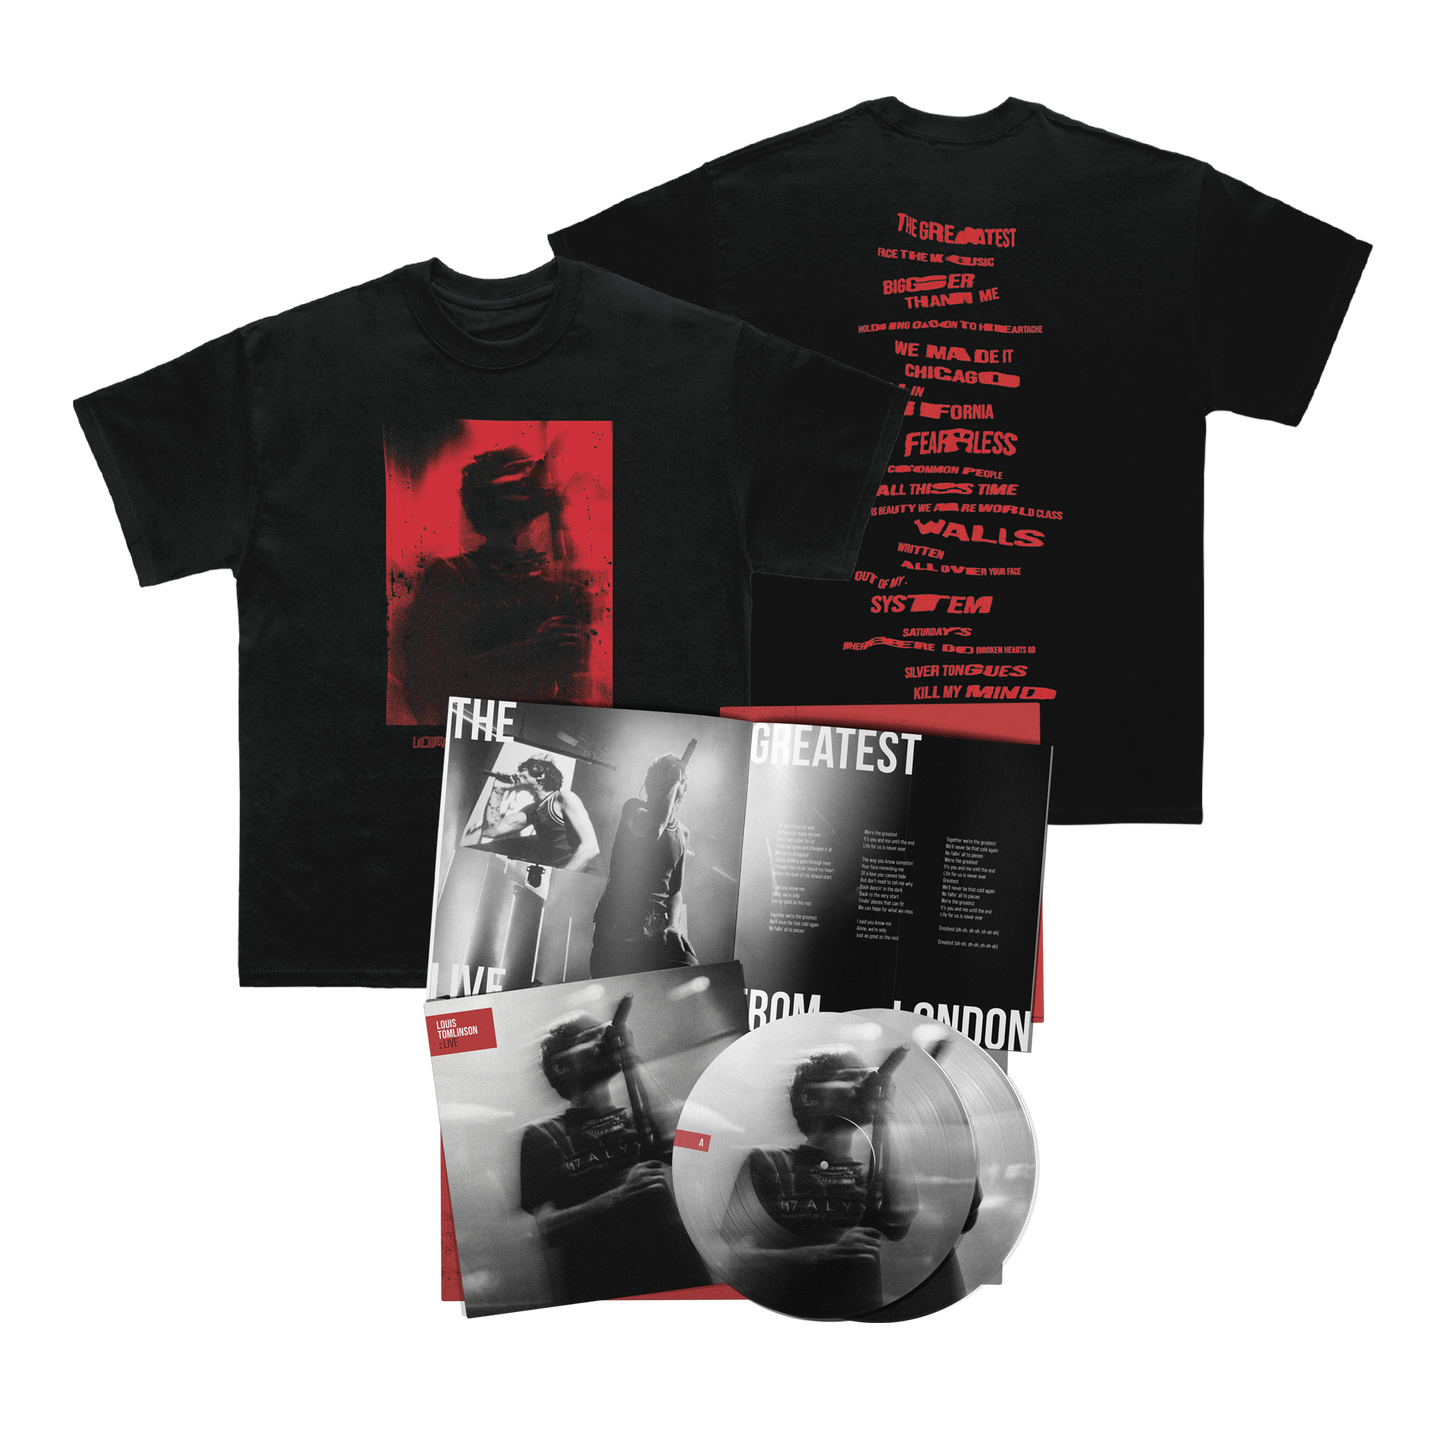 Louis Tomlinson : Live | Download + T-Shirt + Choice of Format